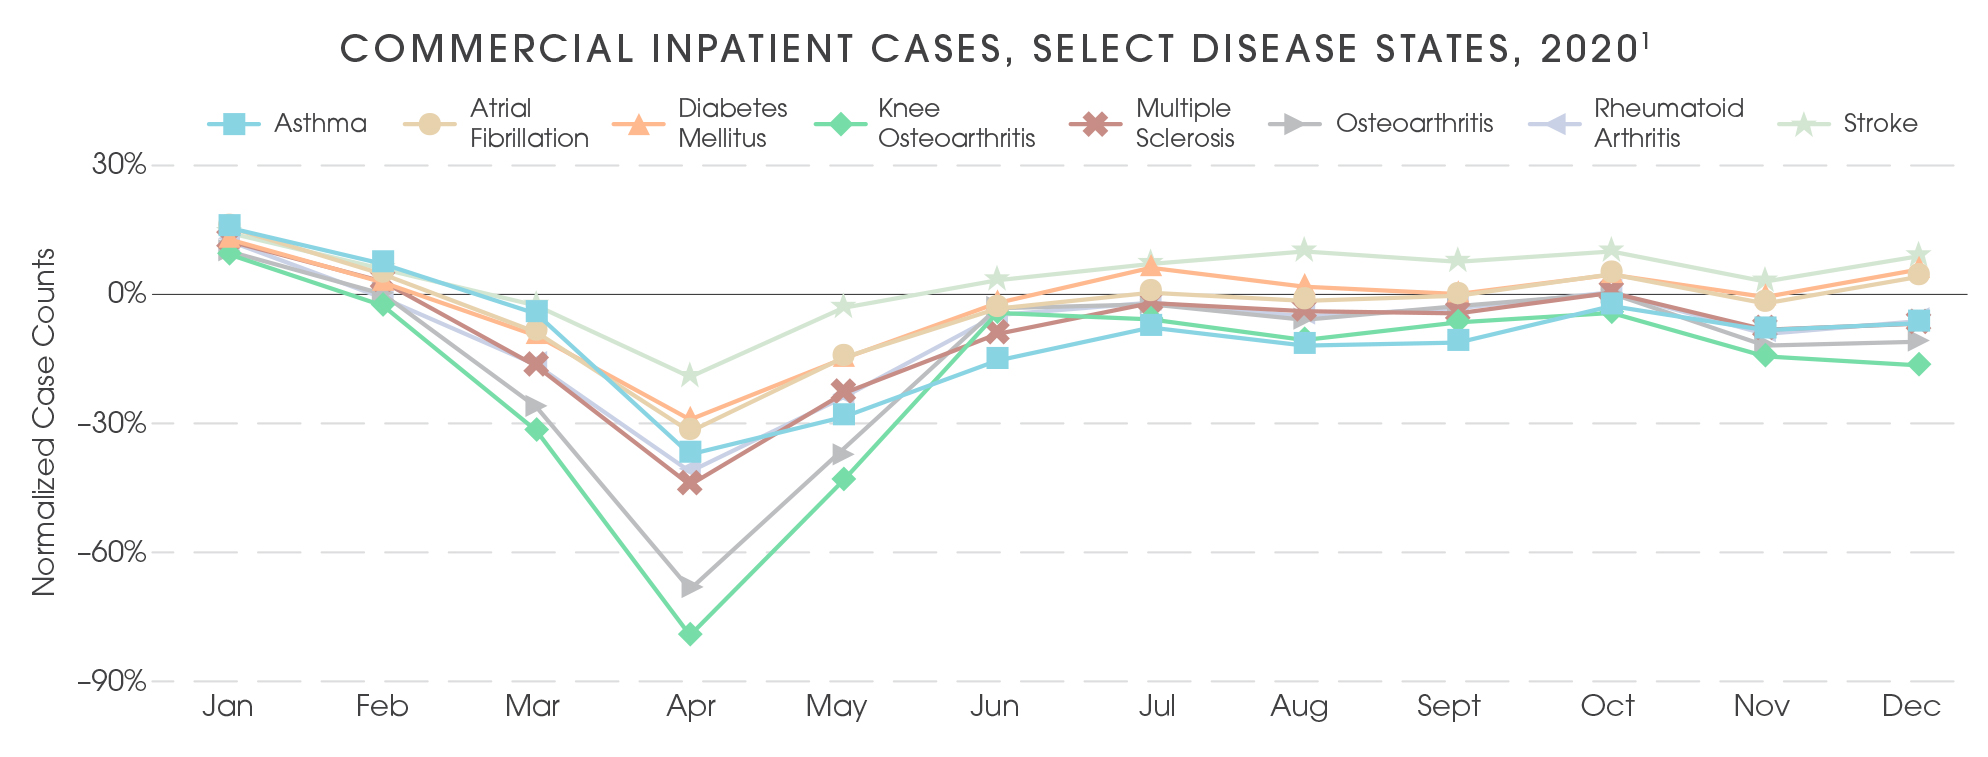 COMMERCIAL INPATIENT CASES, SELECT DISEASE STATES, 2020